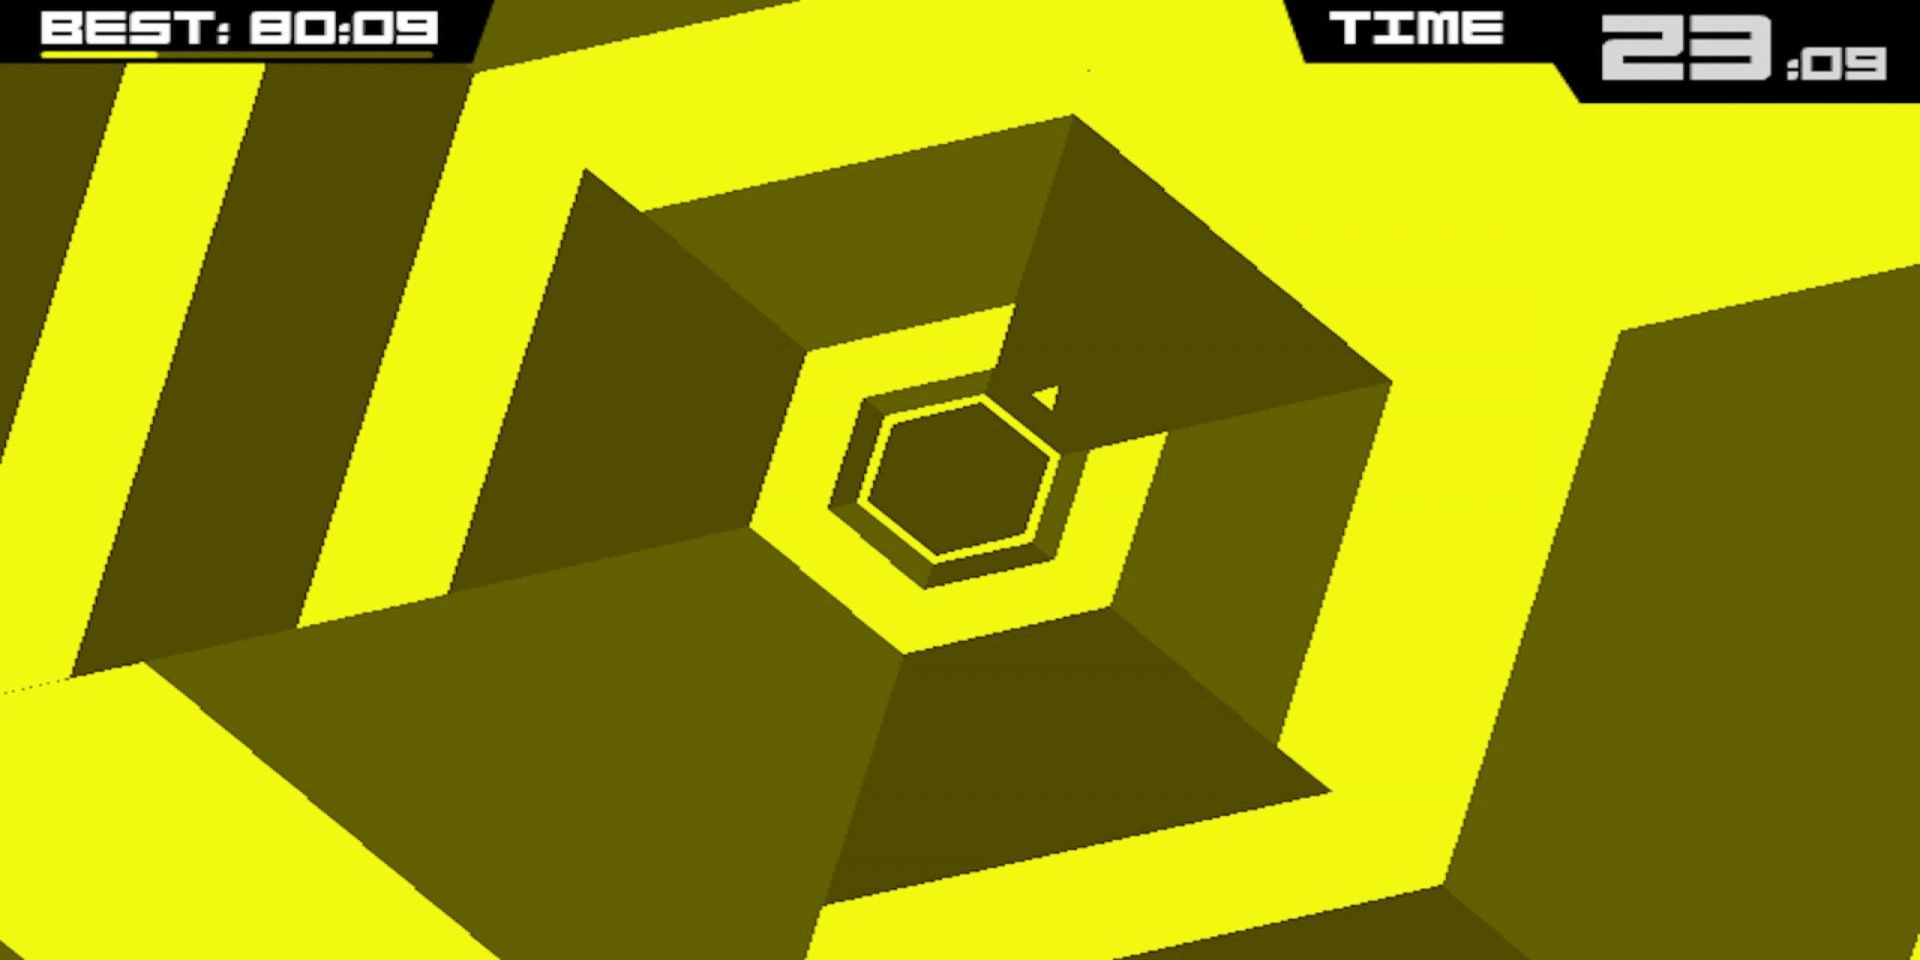 Gameplay of the 2012 indie video game Super Hexagon.